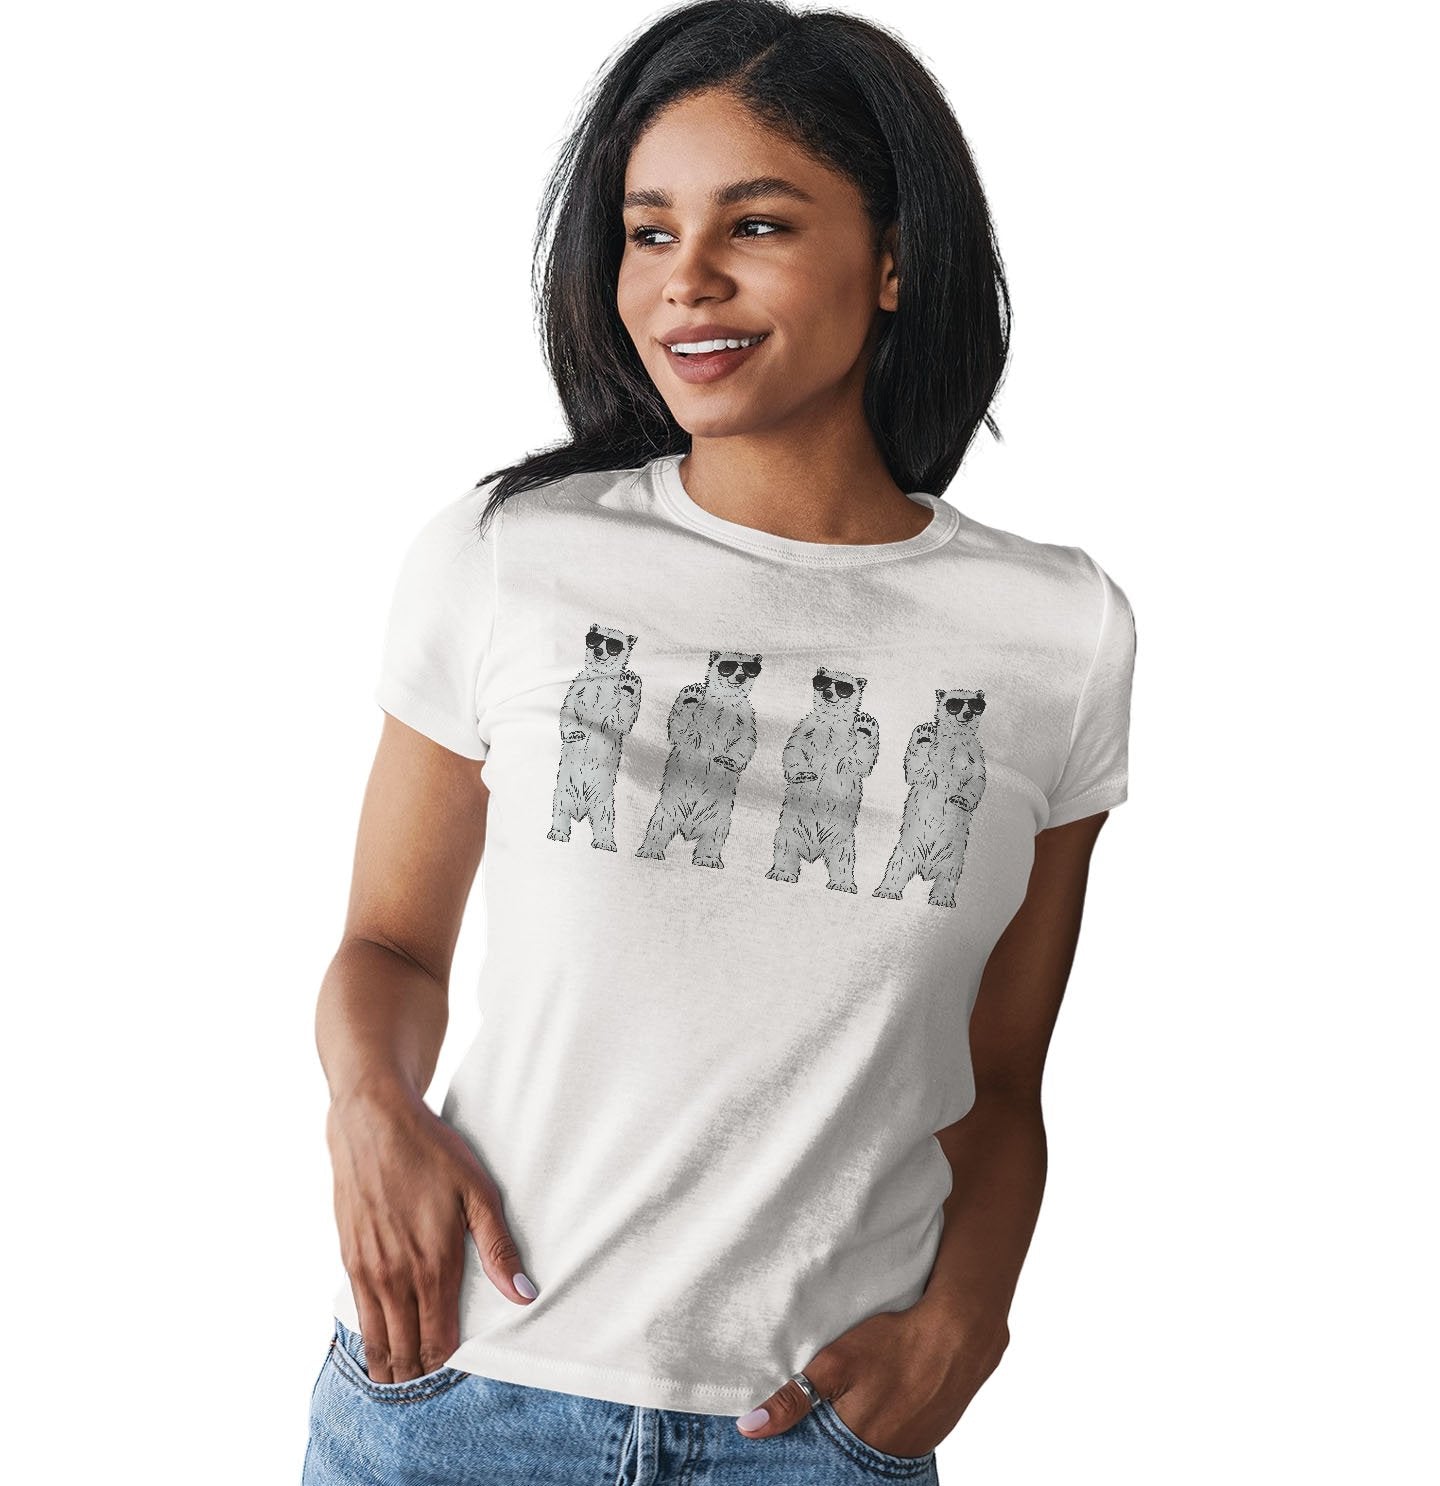 Dancing Polar Bears with Sunglasses - Women's Fitted T-Shirt